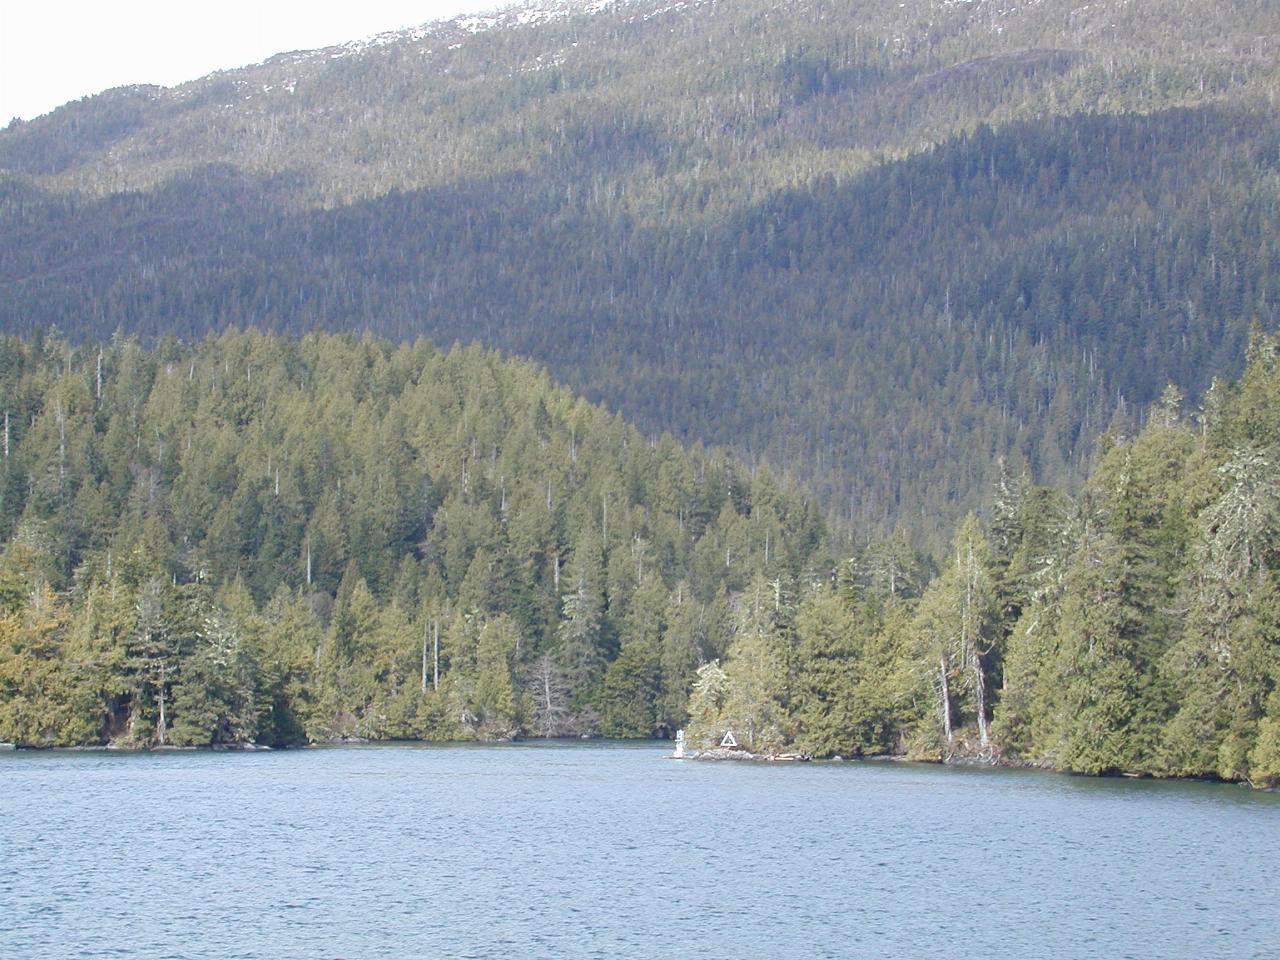 Approaching the narrow entrance to a small inlet off Grenville Channel, BC